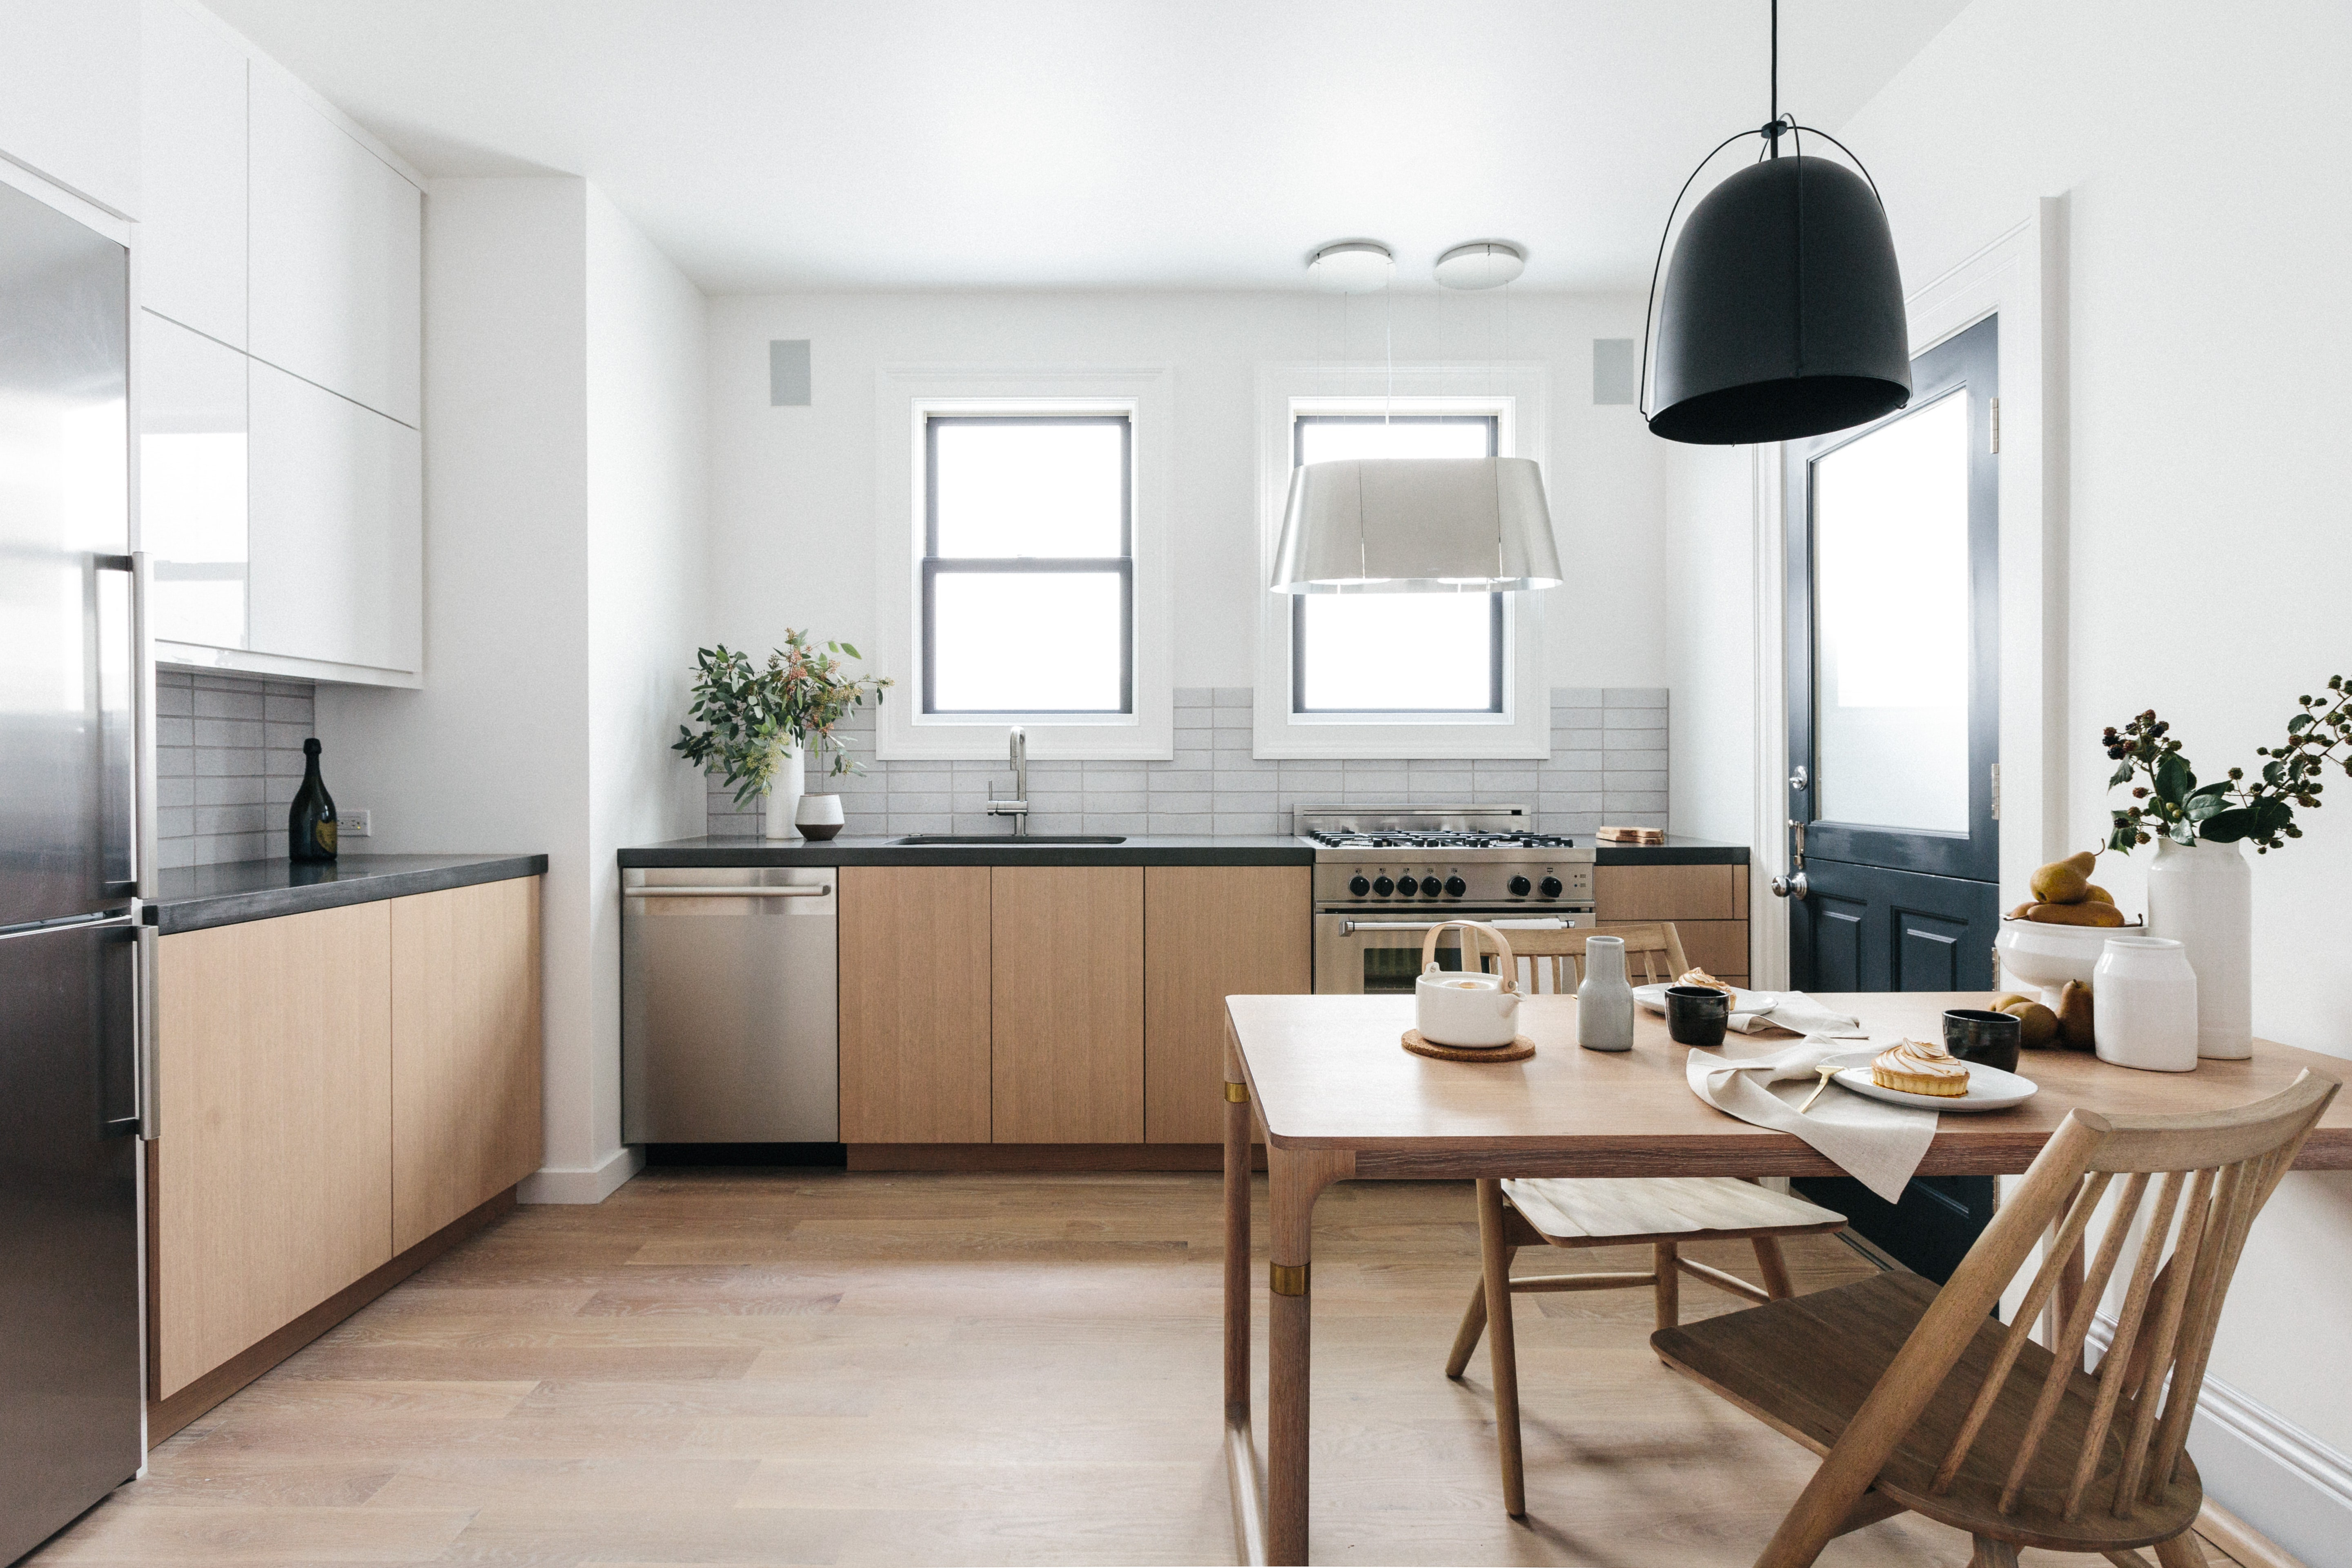 How To Design A Minimalist Home That Still Feels Welcoming